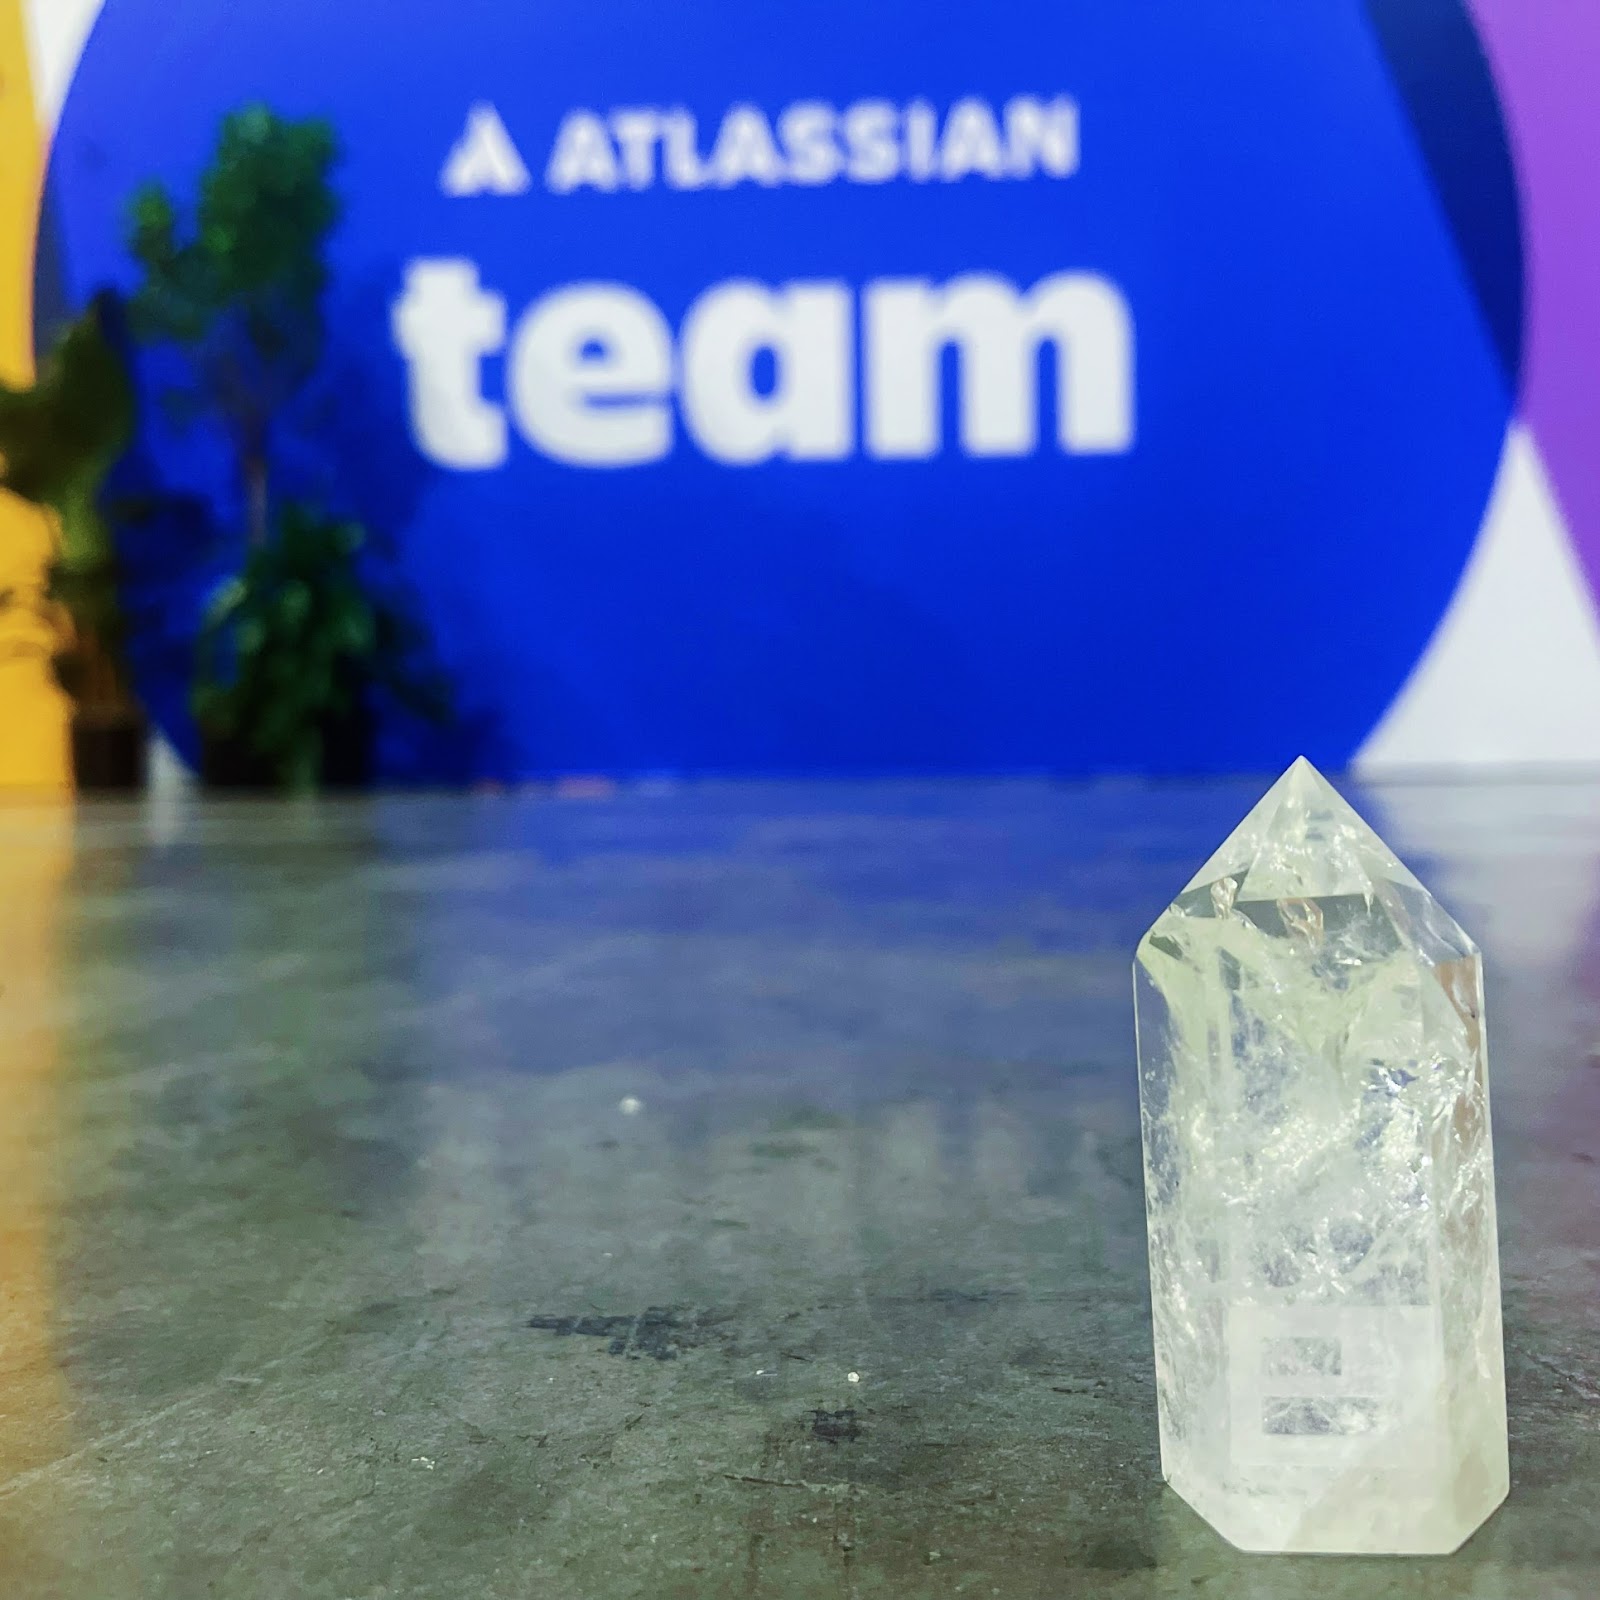 A Visor-branded crystal in front of the Atlassian Team expo hall sign